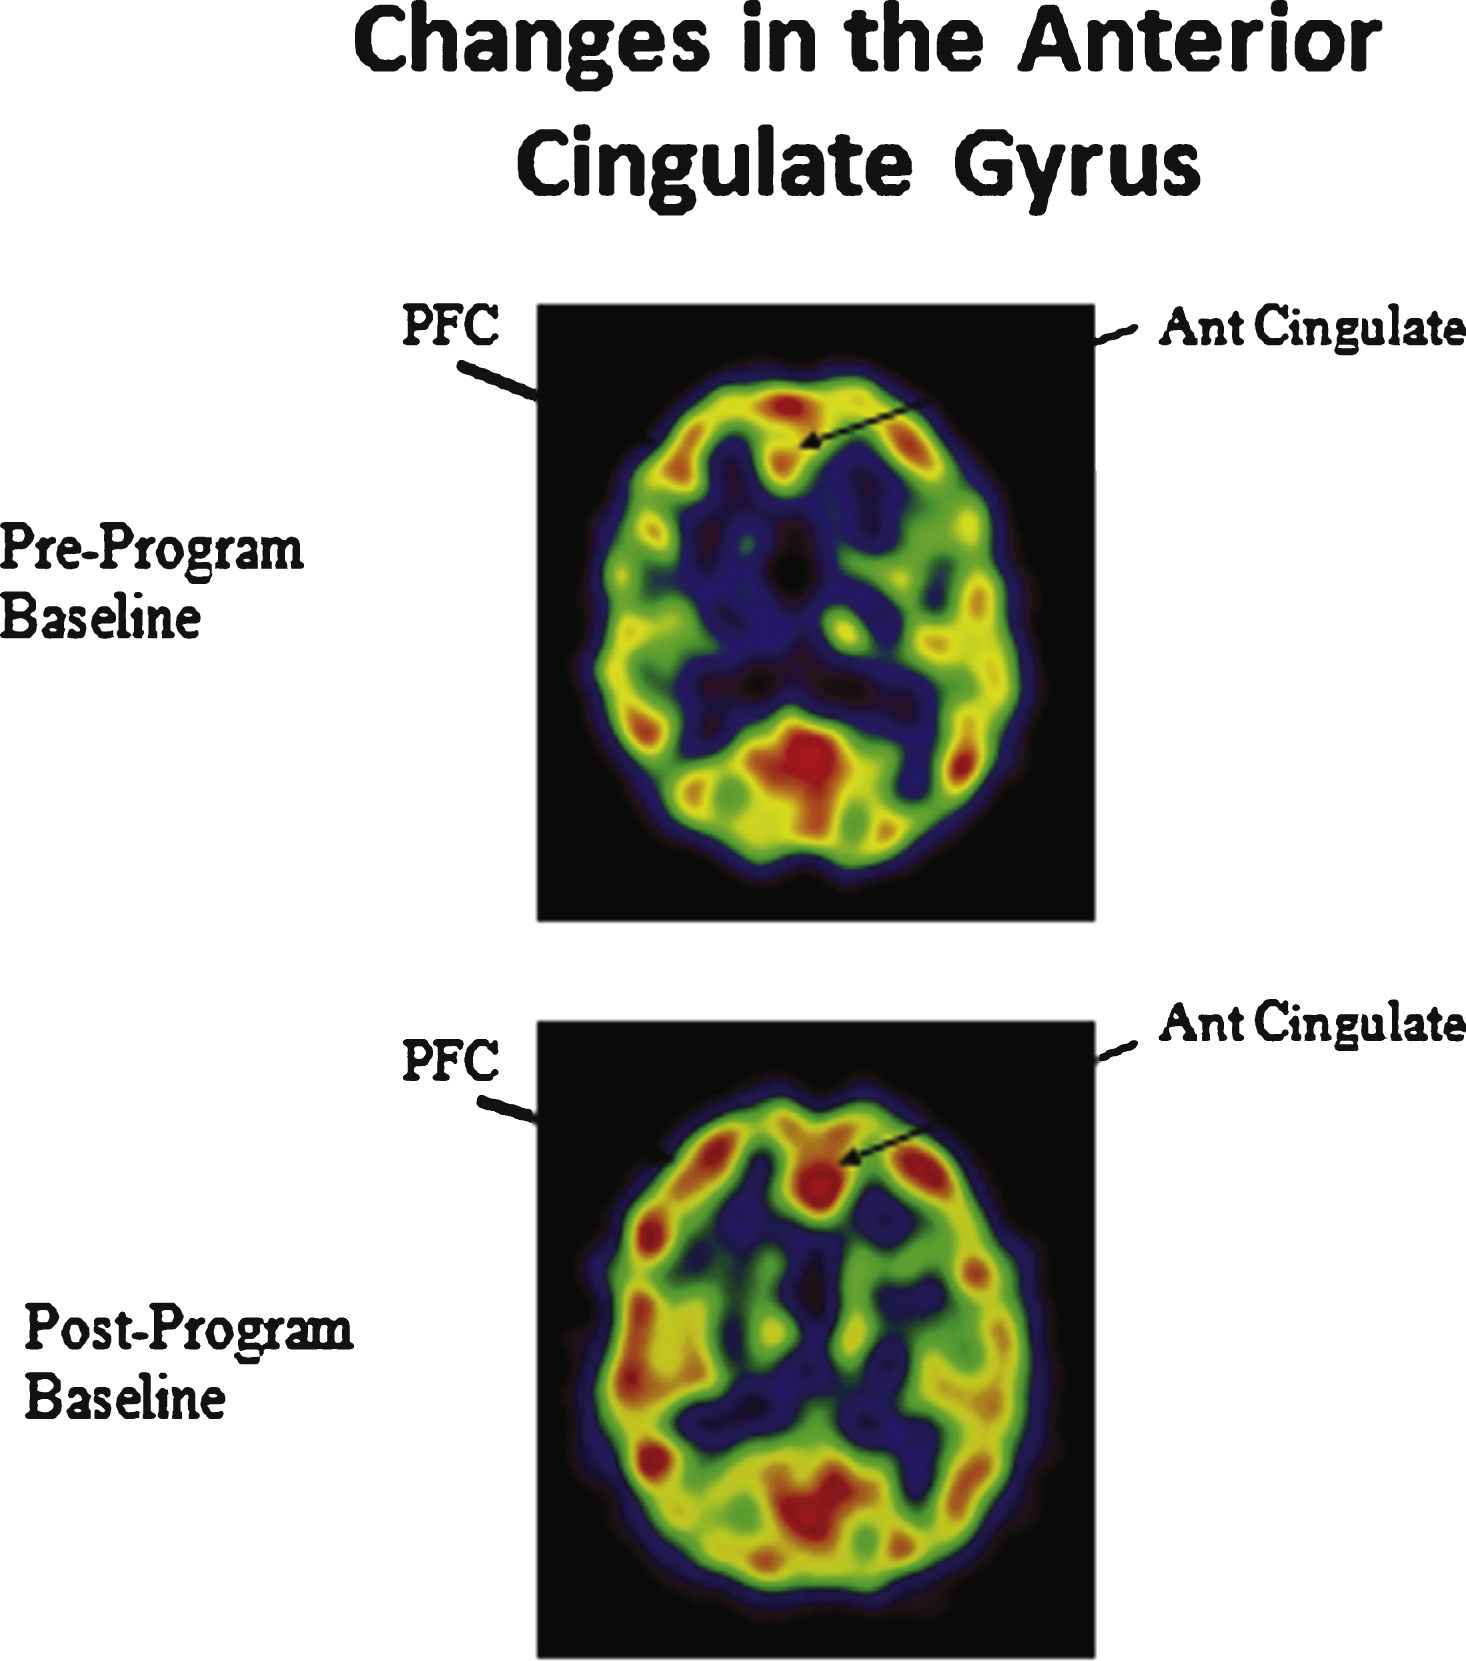 Enhanced cerebral blood flow in the prefrontal cortex (PFC) and anterior cingulate gyrus.